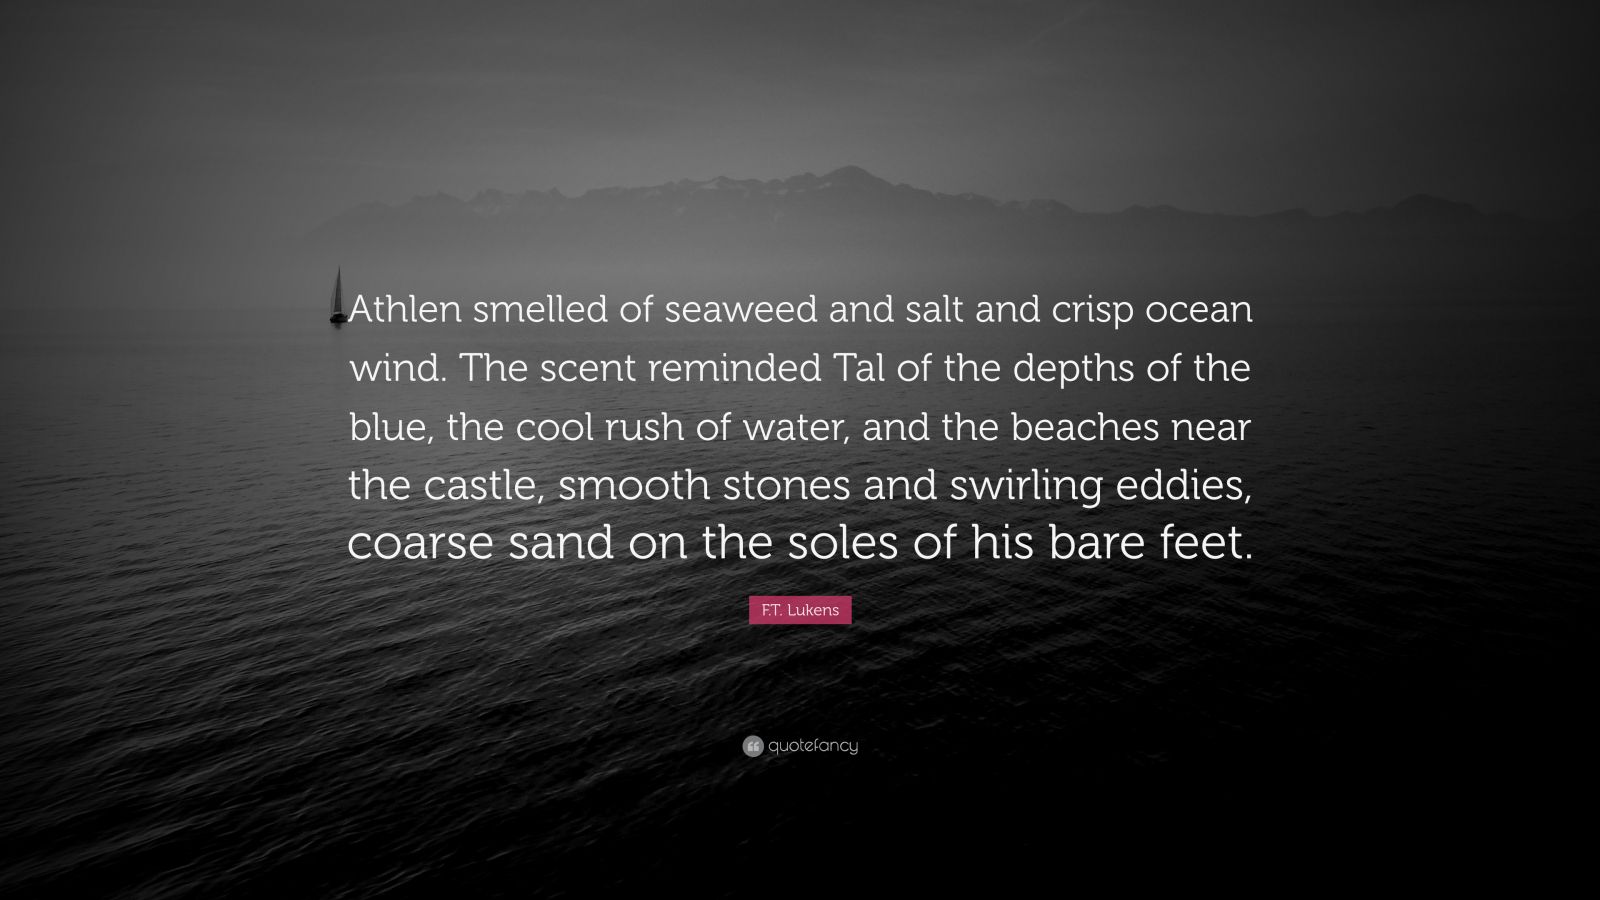 F.T. Lukens Quote: “Athlen smelled of seaweed and salt and crisp